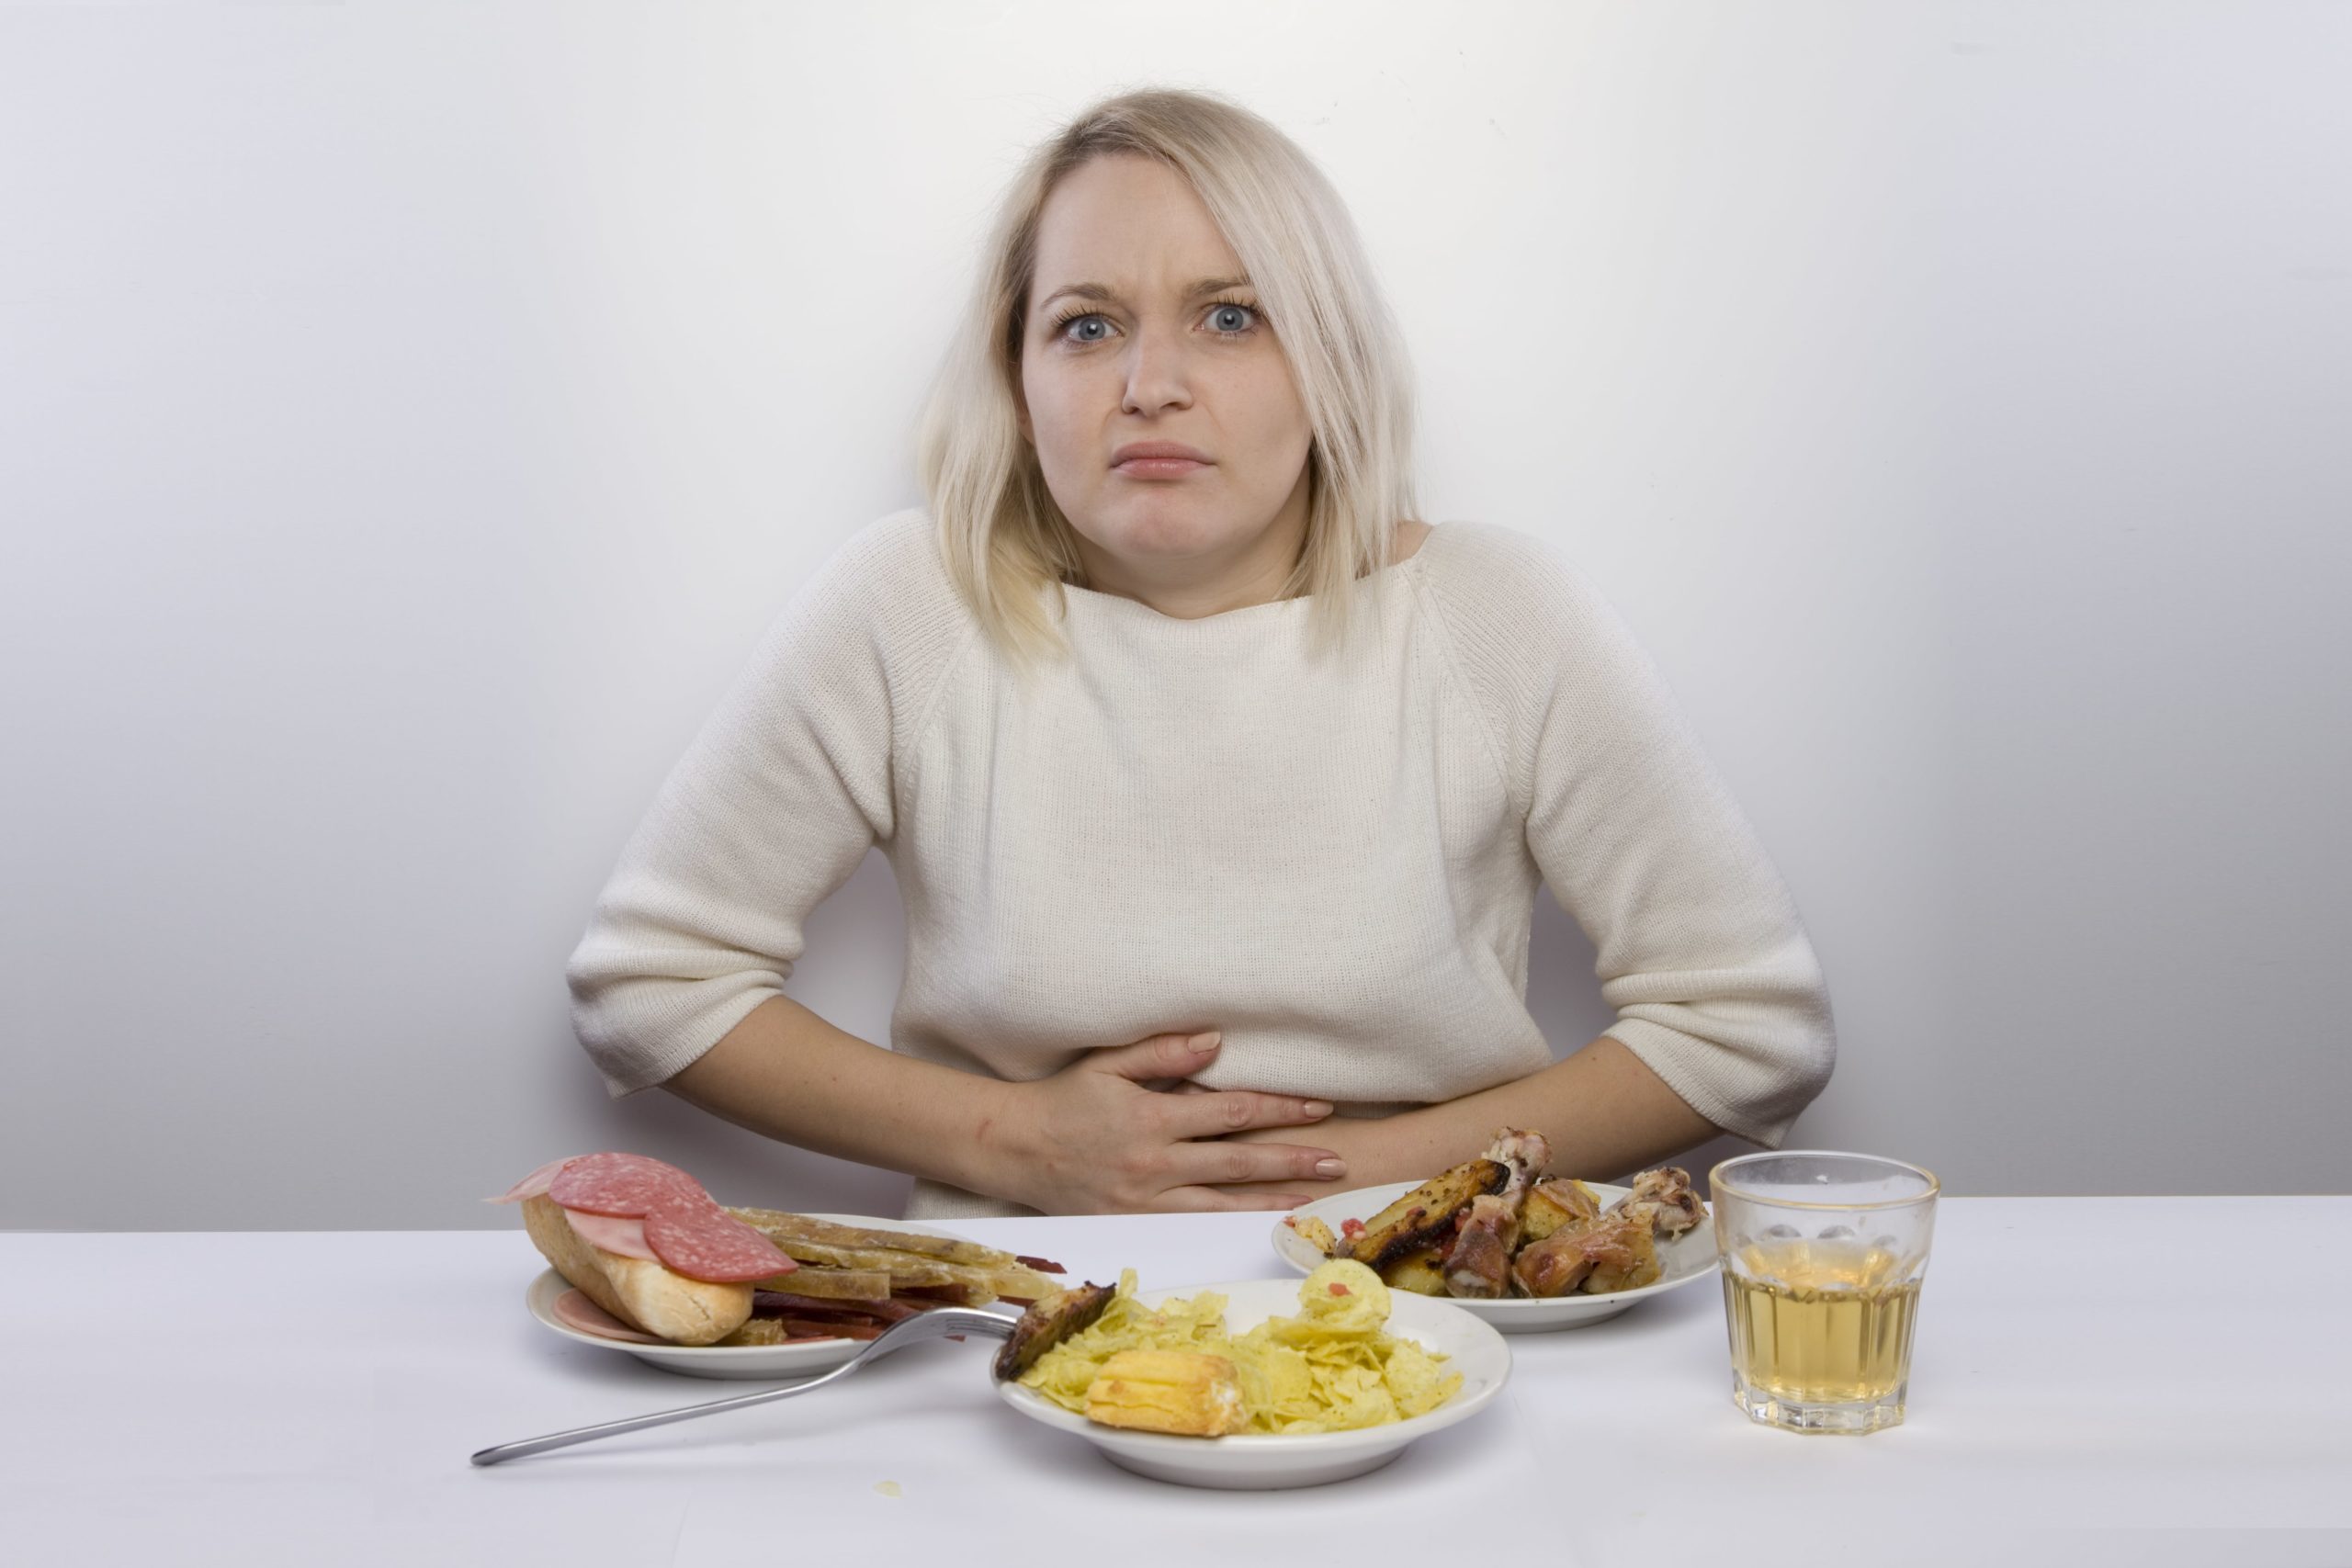 BREAKFAST MISTAKES THAT CAUSE INDIGESTION